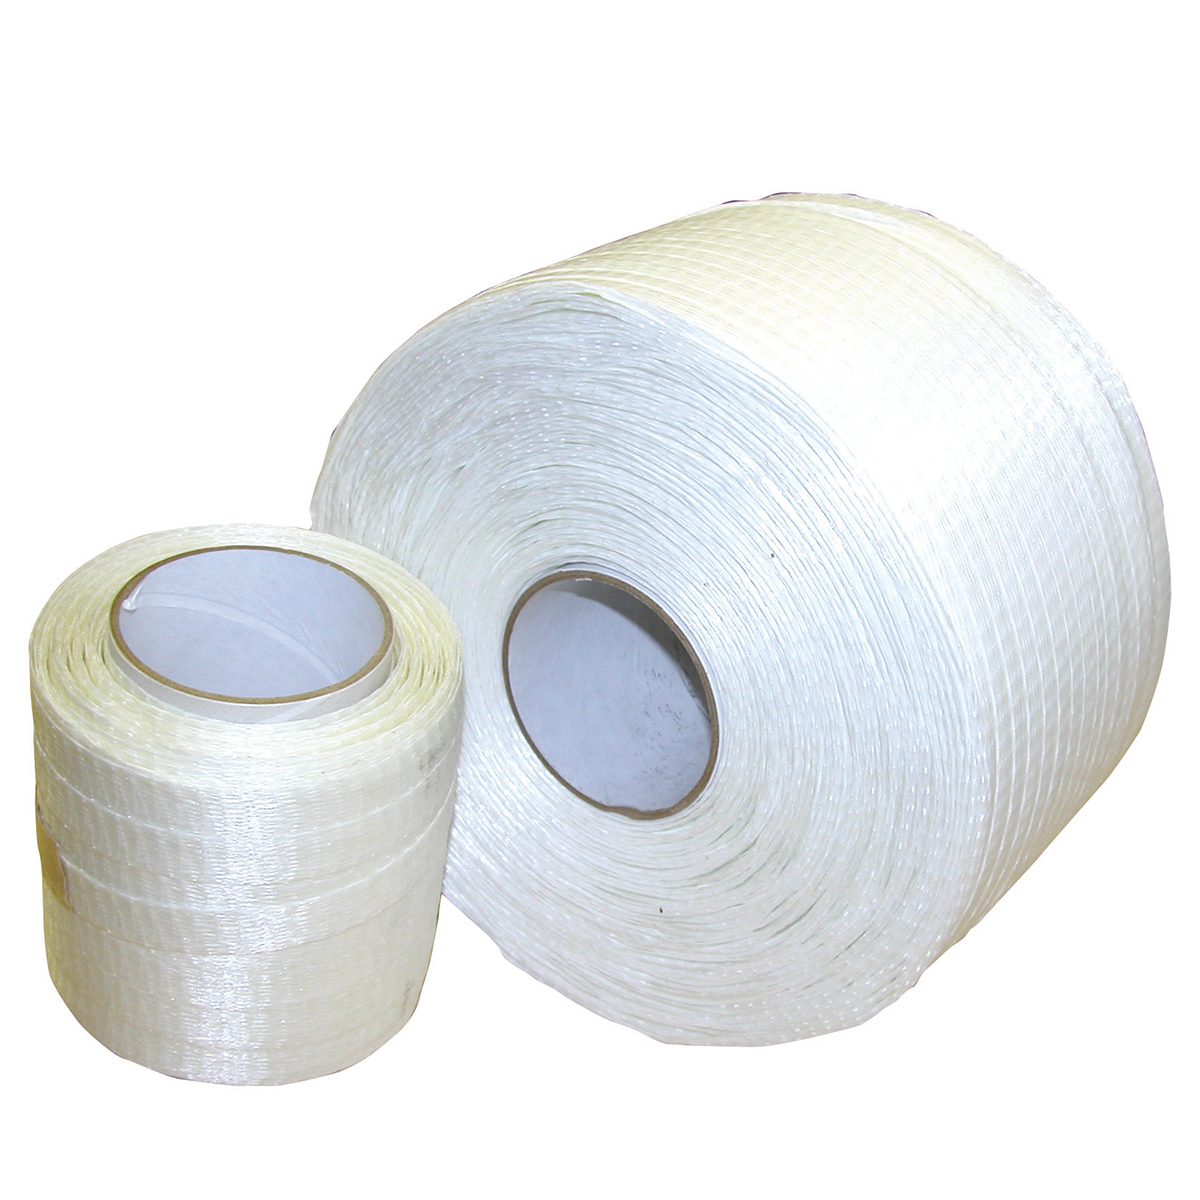 Dr.Shrink - 3/4' x 2100' Woven Cord Strapping - Ds-750